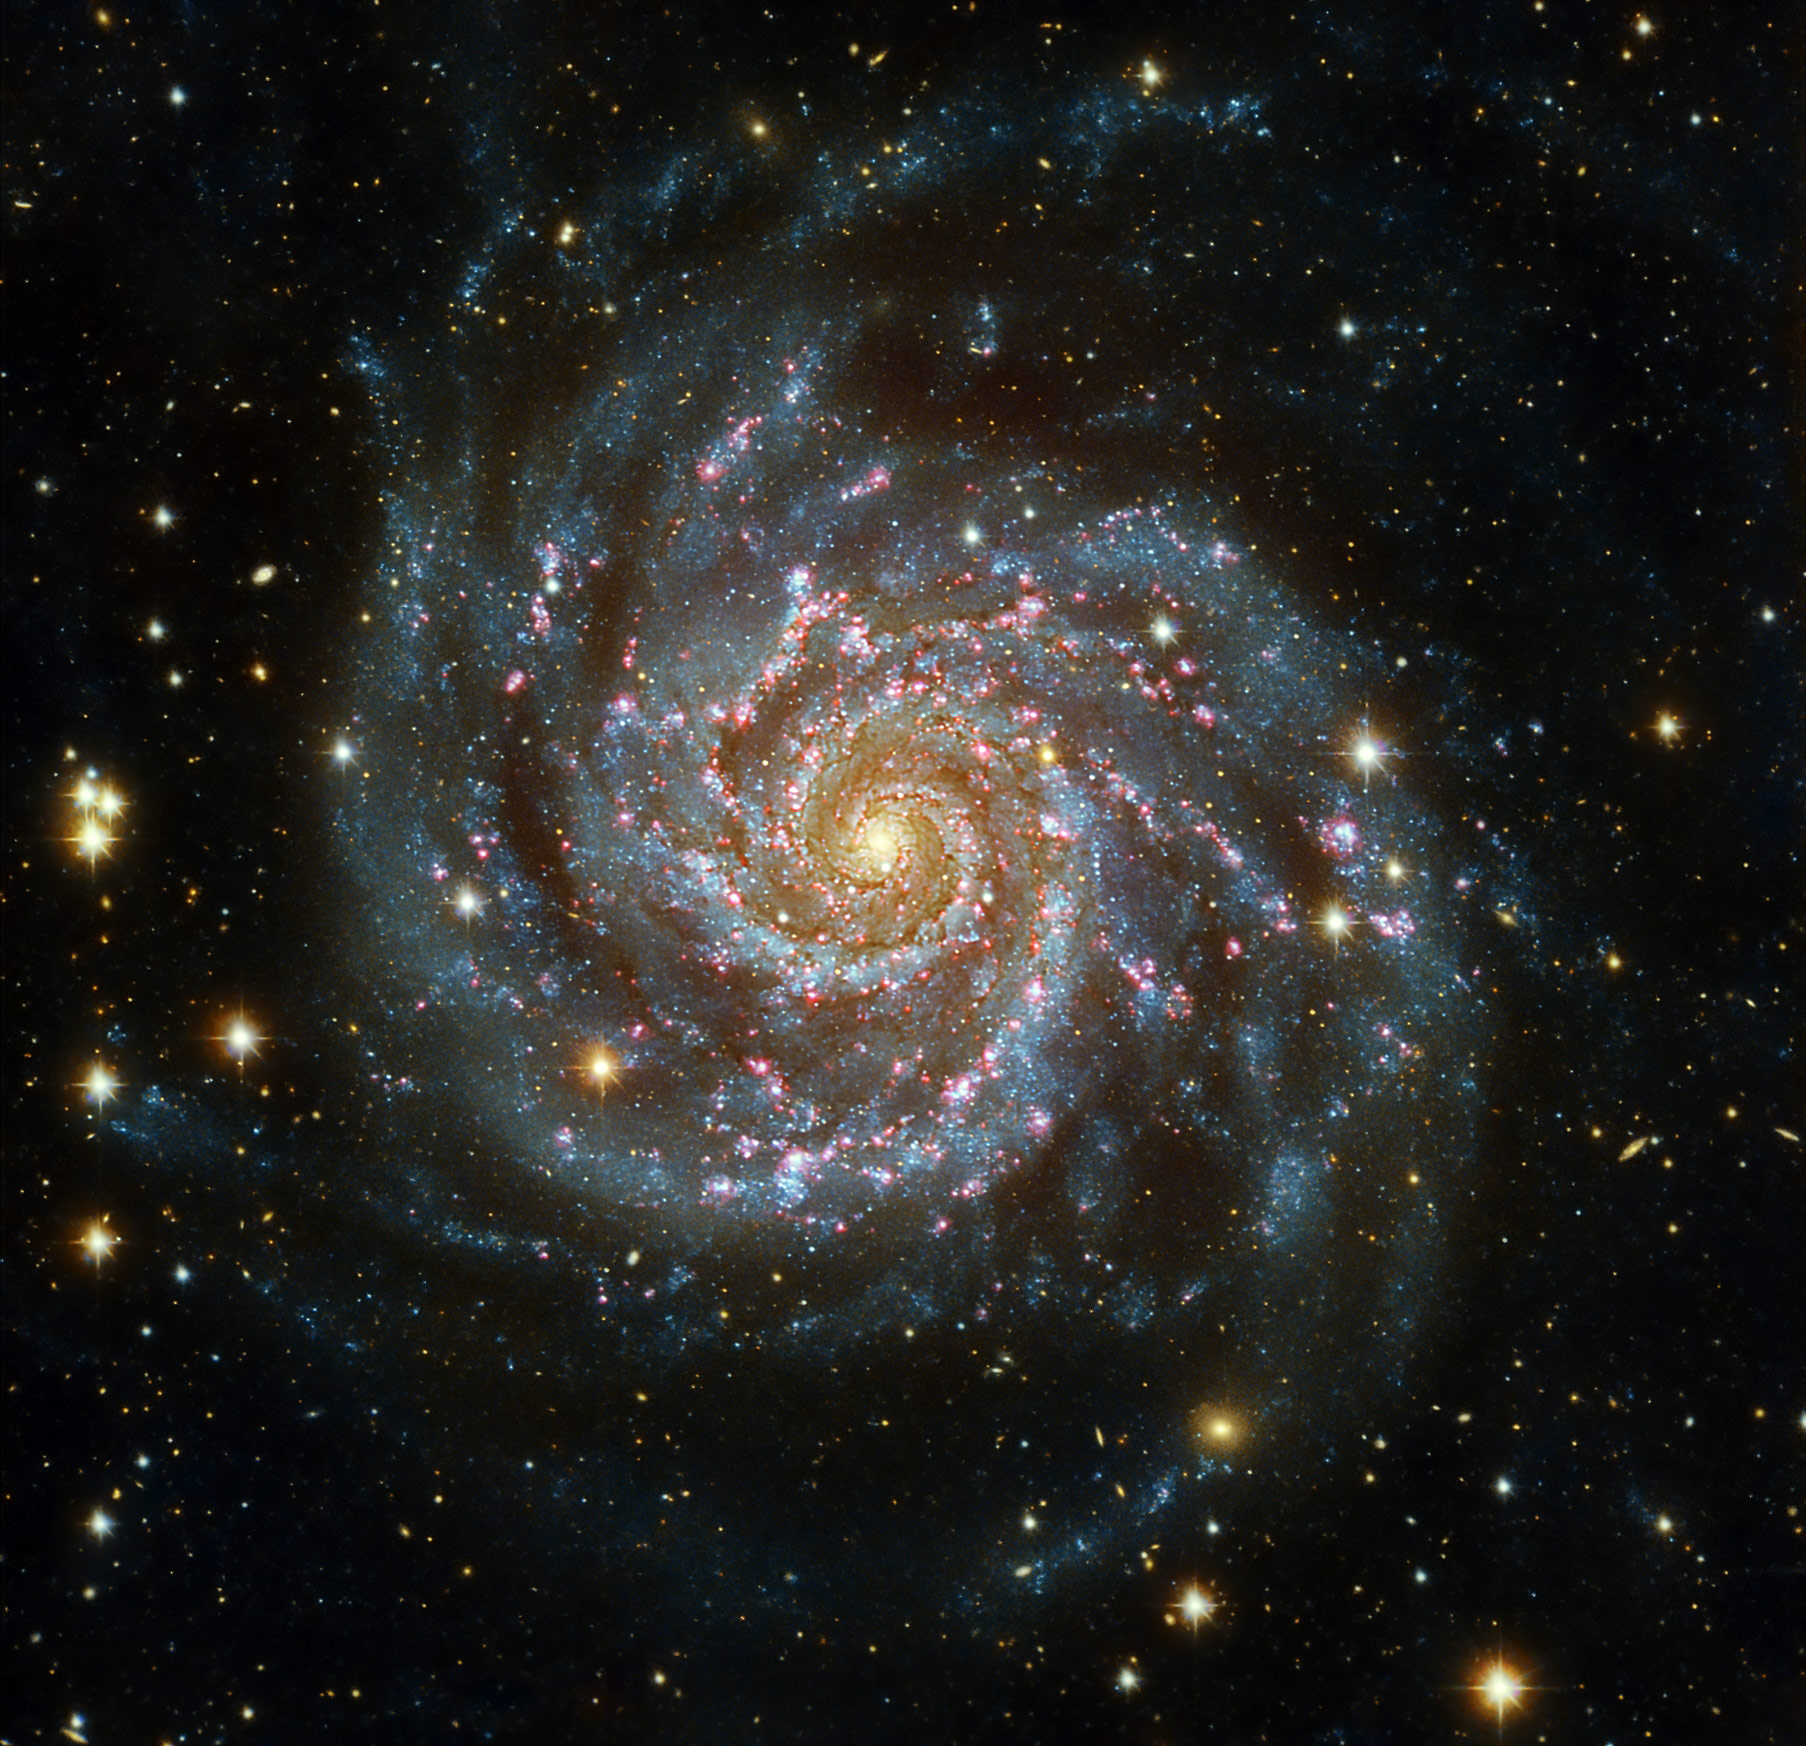 Study Suggest Spiral Galaxies Are Larger Than Previously Thought